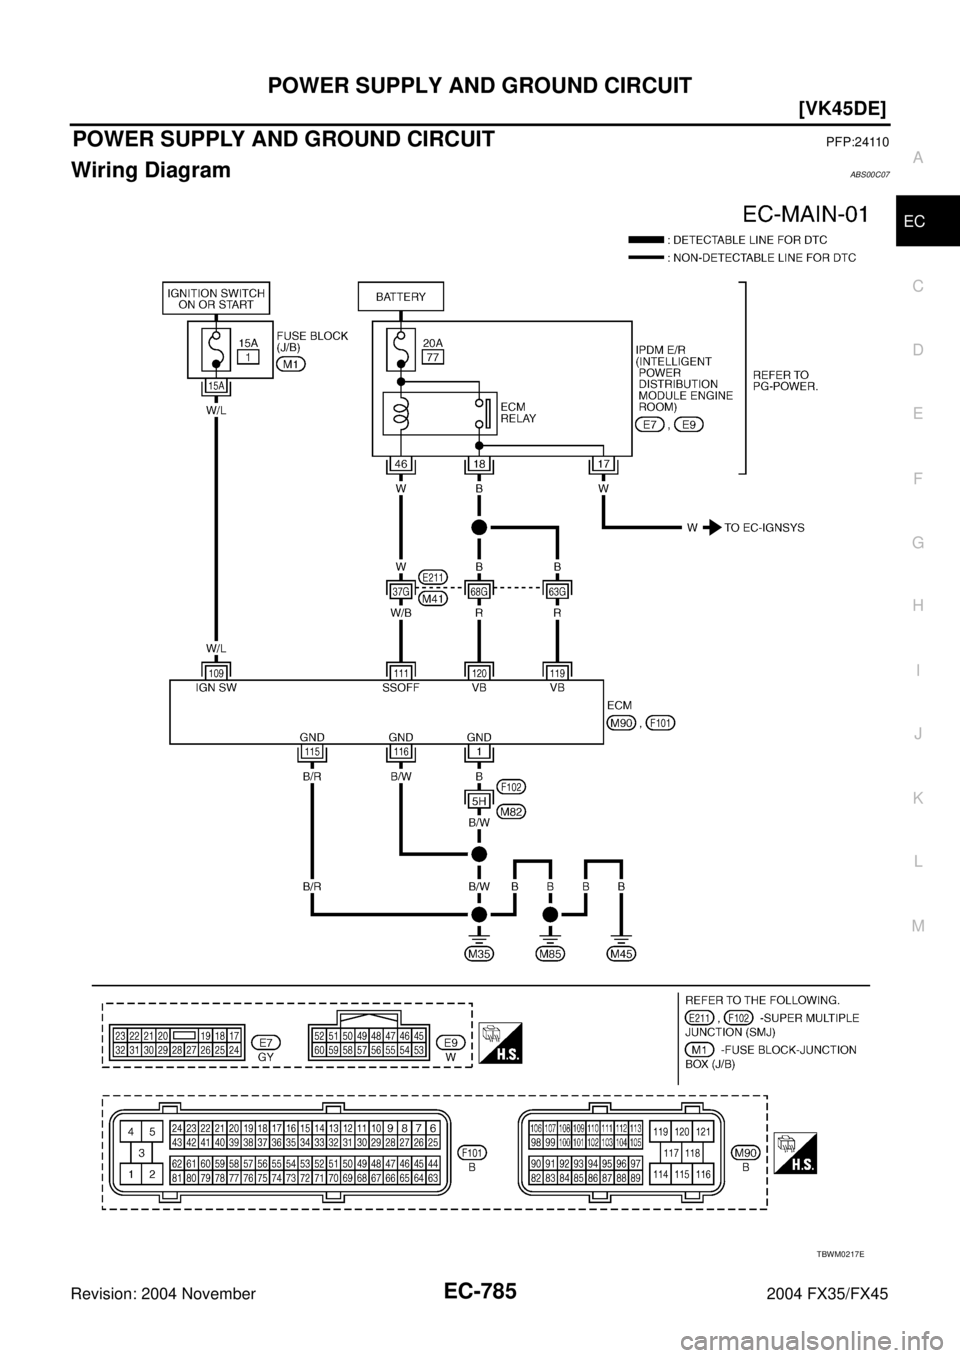 INFINITI FX35 2004  Service Manual POWER SUPPLY AND GROUND CIRCUIT
EC-785
[VK45DE]
C
D
E
F
G
H
I
J
K
L
MA
EC
Revision: 2004 November 2004 FX35/FX45
POWER SUPPLY AND GROUND CIRCUITPFP:24110
Wiring DiagramABS00C07
TBWM0217E 